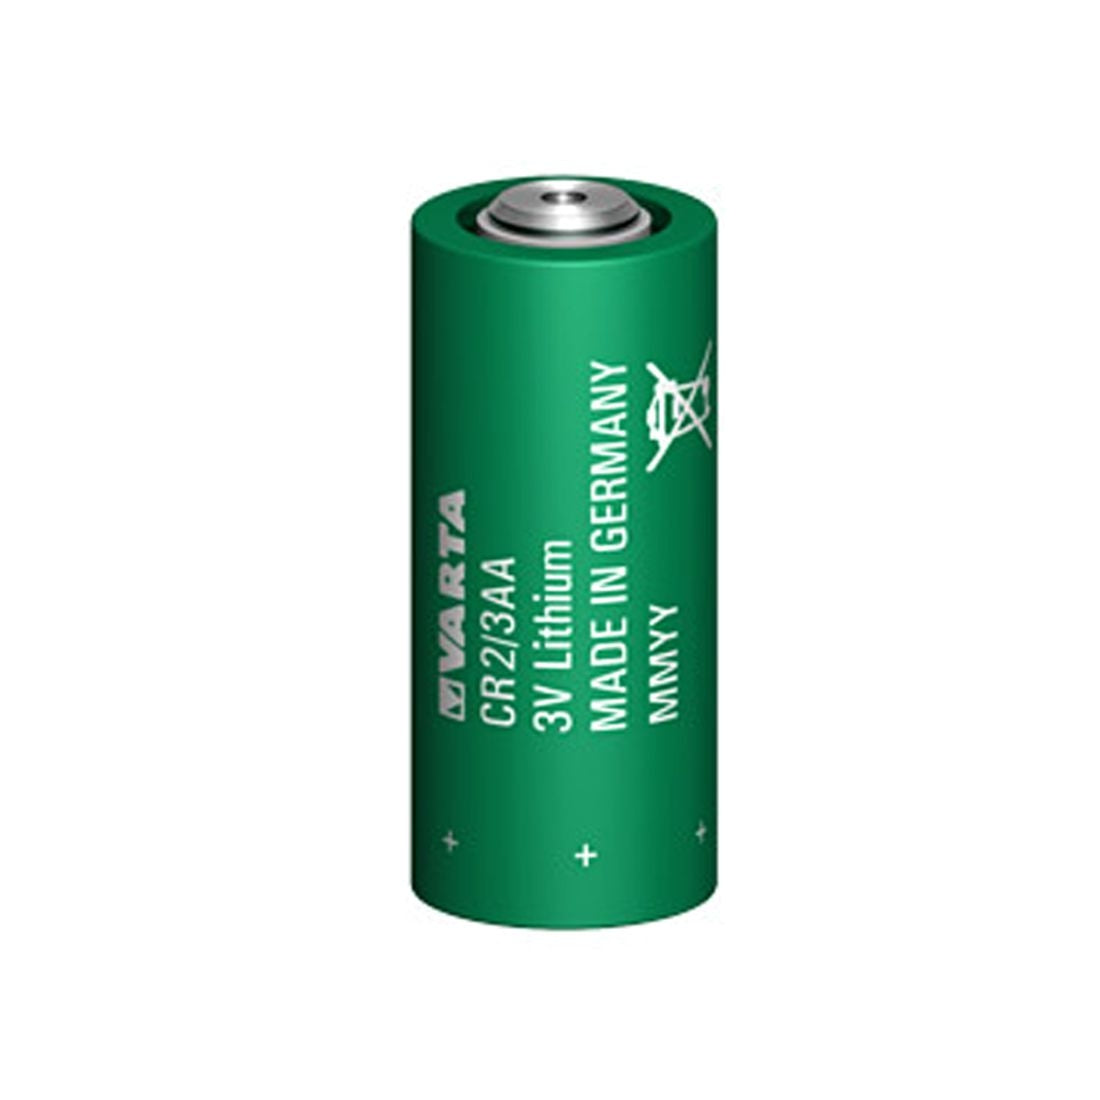 CR (Coin Type Lithium Manganese Dioxide Battery)